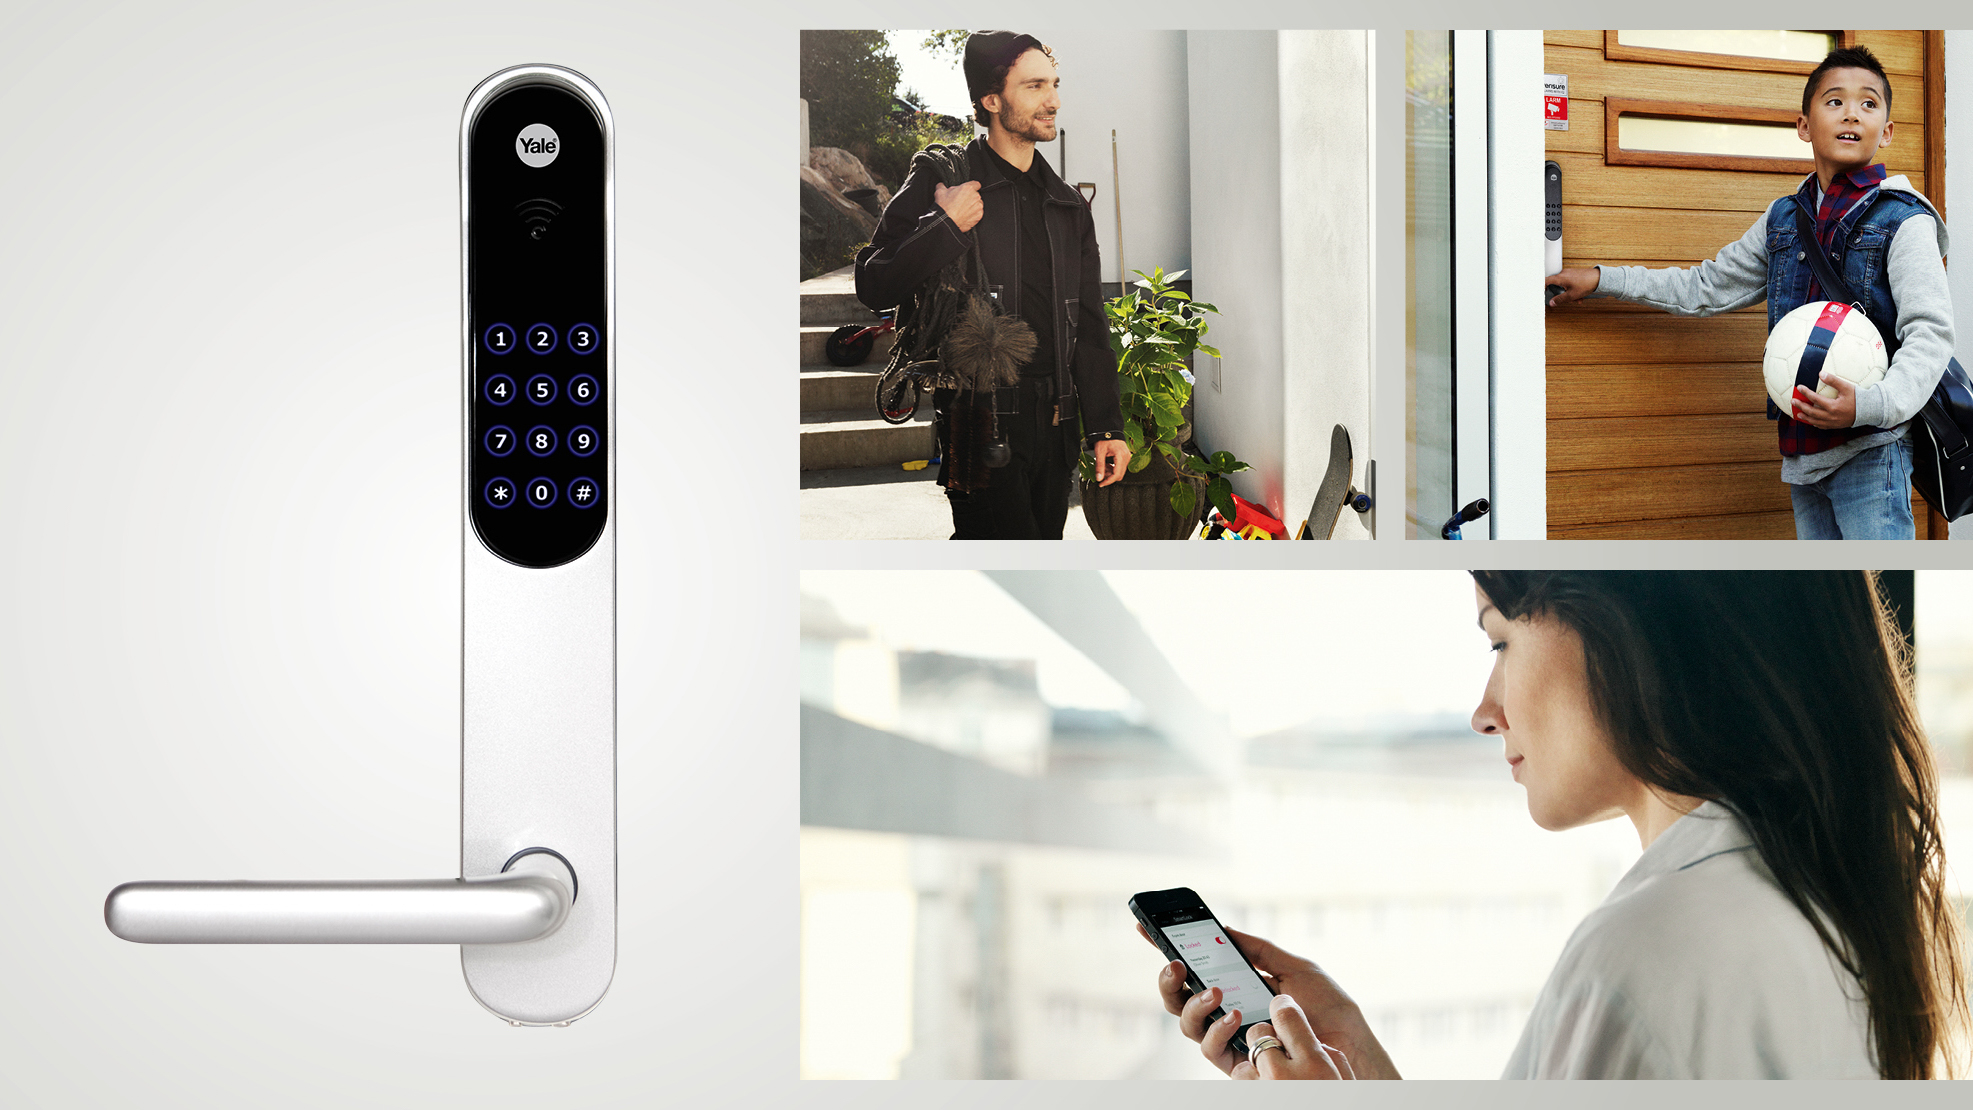 Offering a broad array of security access options, the Yale Doorman smart door lock can be opened with PIN codes, smartphone app, proximity card, and other options as supported by the Verisure home automation ecosystem. Image: ASSA ABLOY and Verisure.